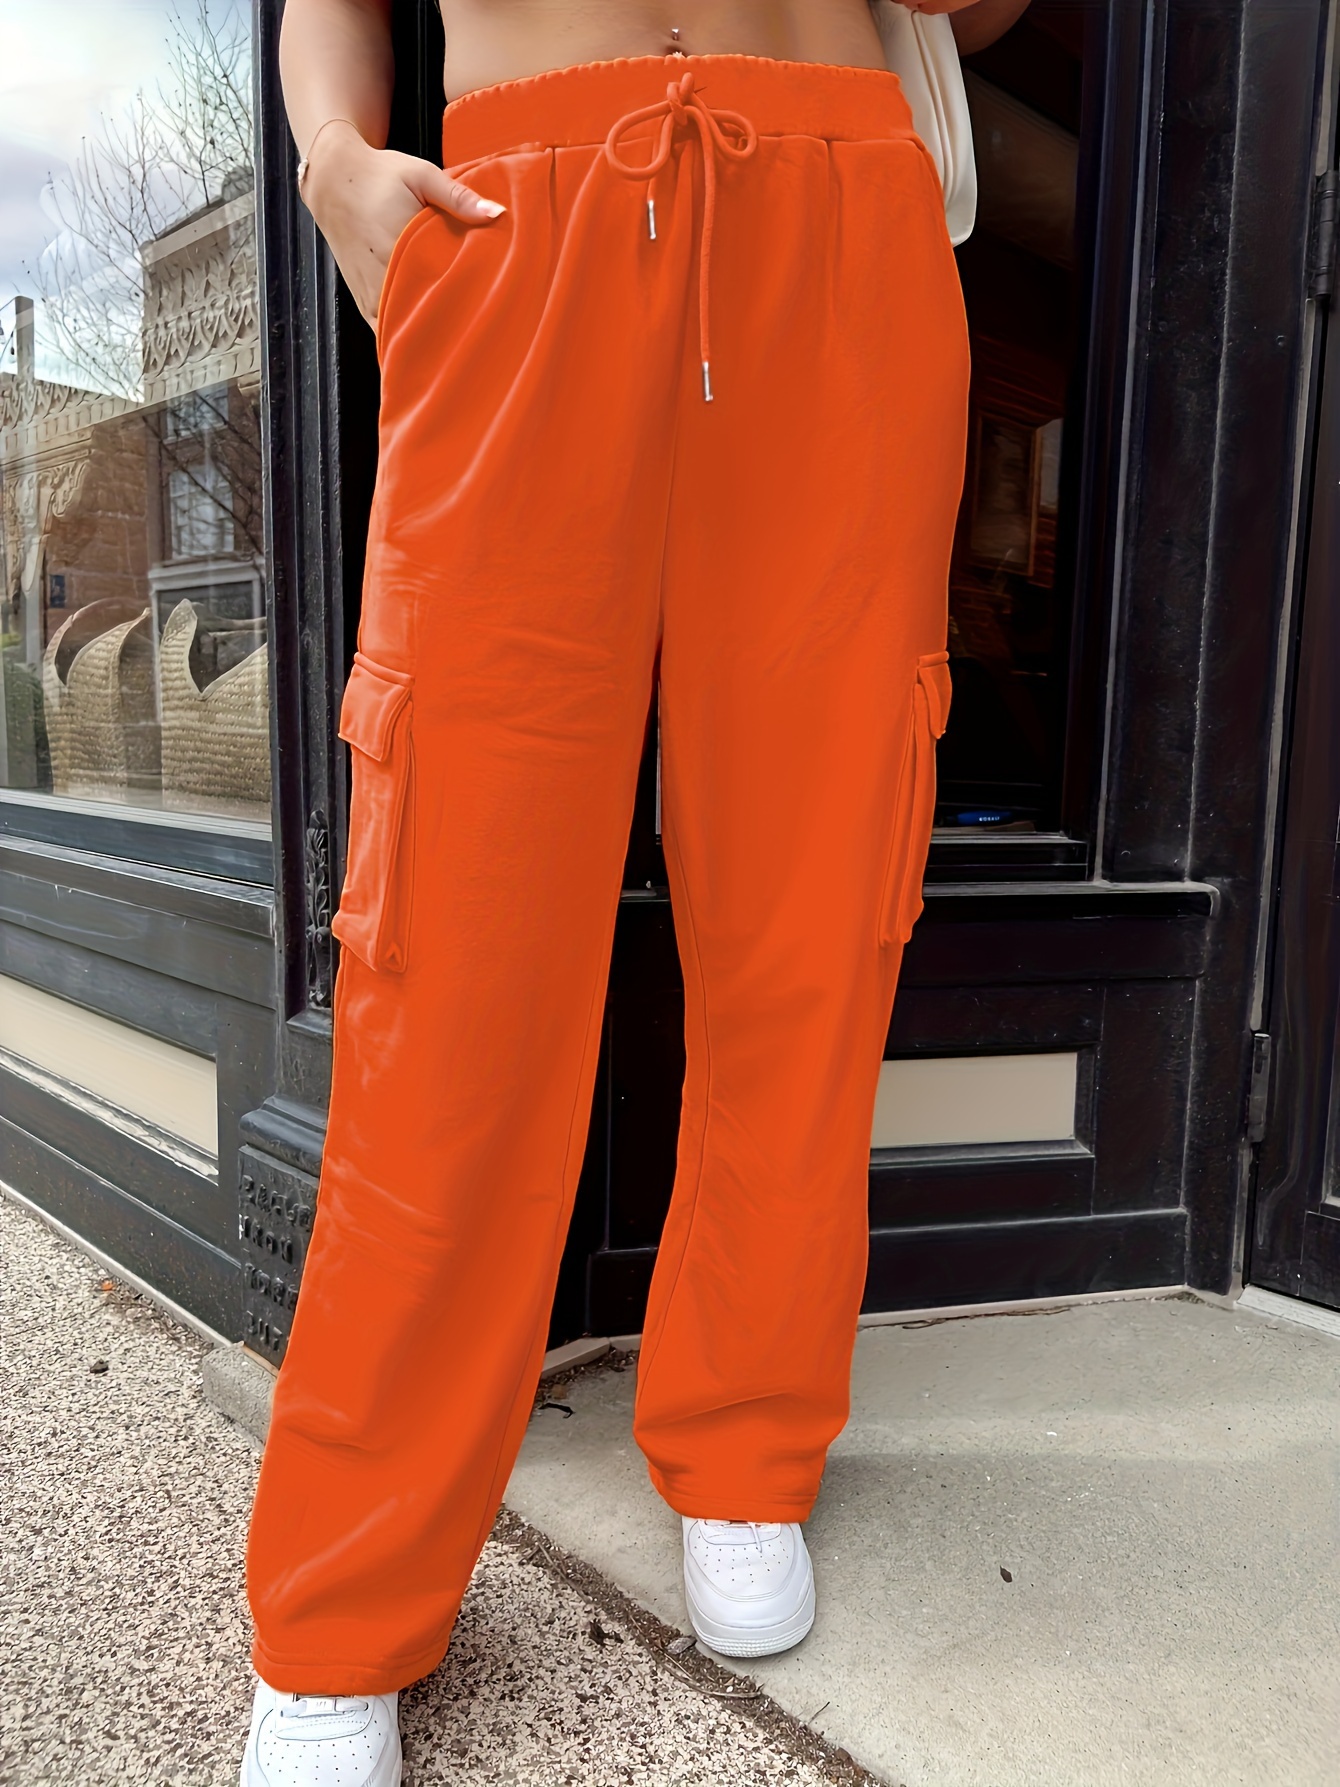 Quiz Woven High Waisted Tailored Trouser - Orange - ShopStyle Pants